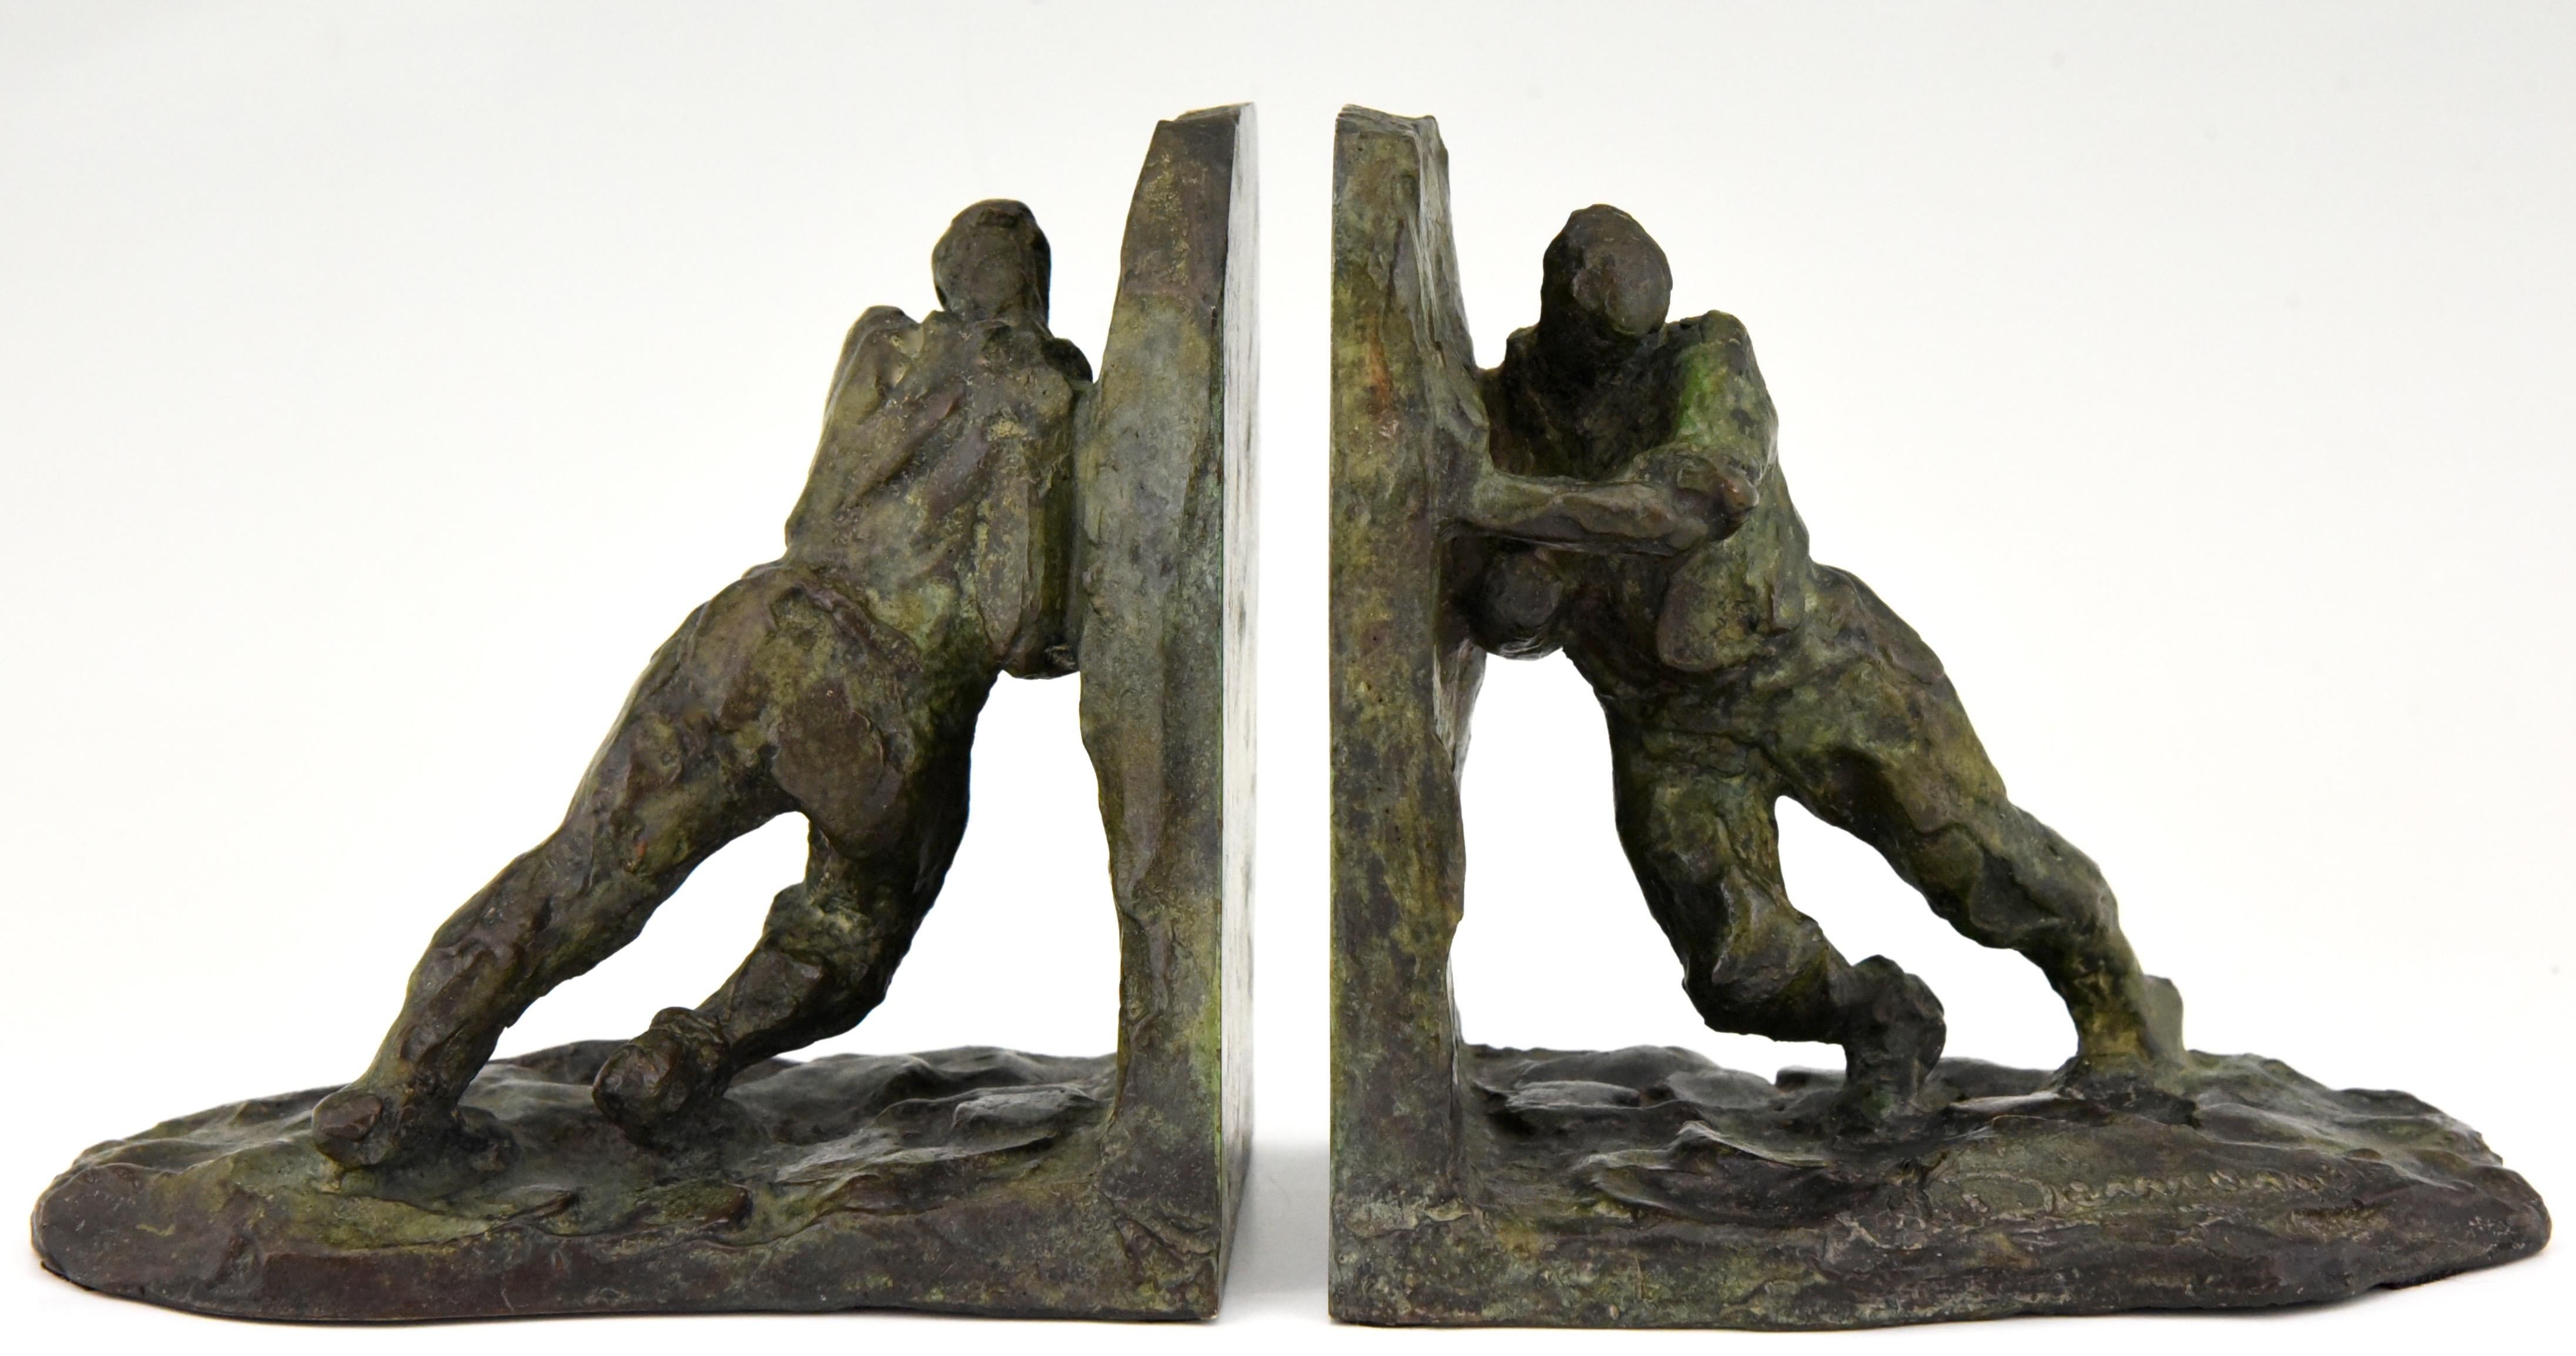 Art Deco bronze bookends picturing two men pushing, France, 1925. 
Signed by the well known sculptor Victor Demanet.
The artist was born in 1895 and worked in Belgium and France. 
The bronzes have a lovely green patina with lighter shades.